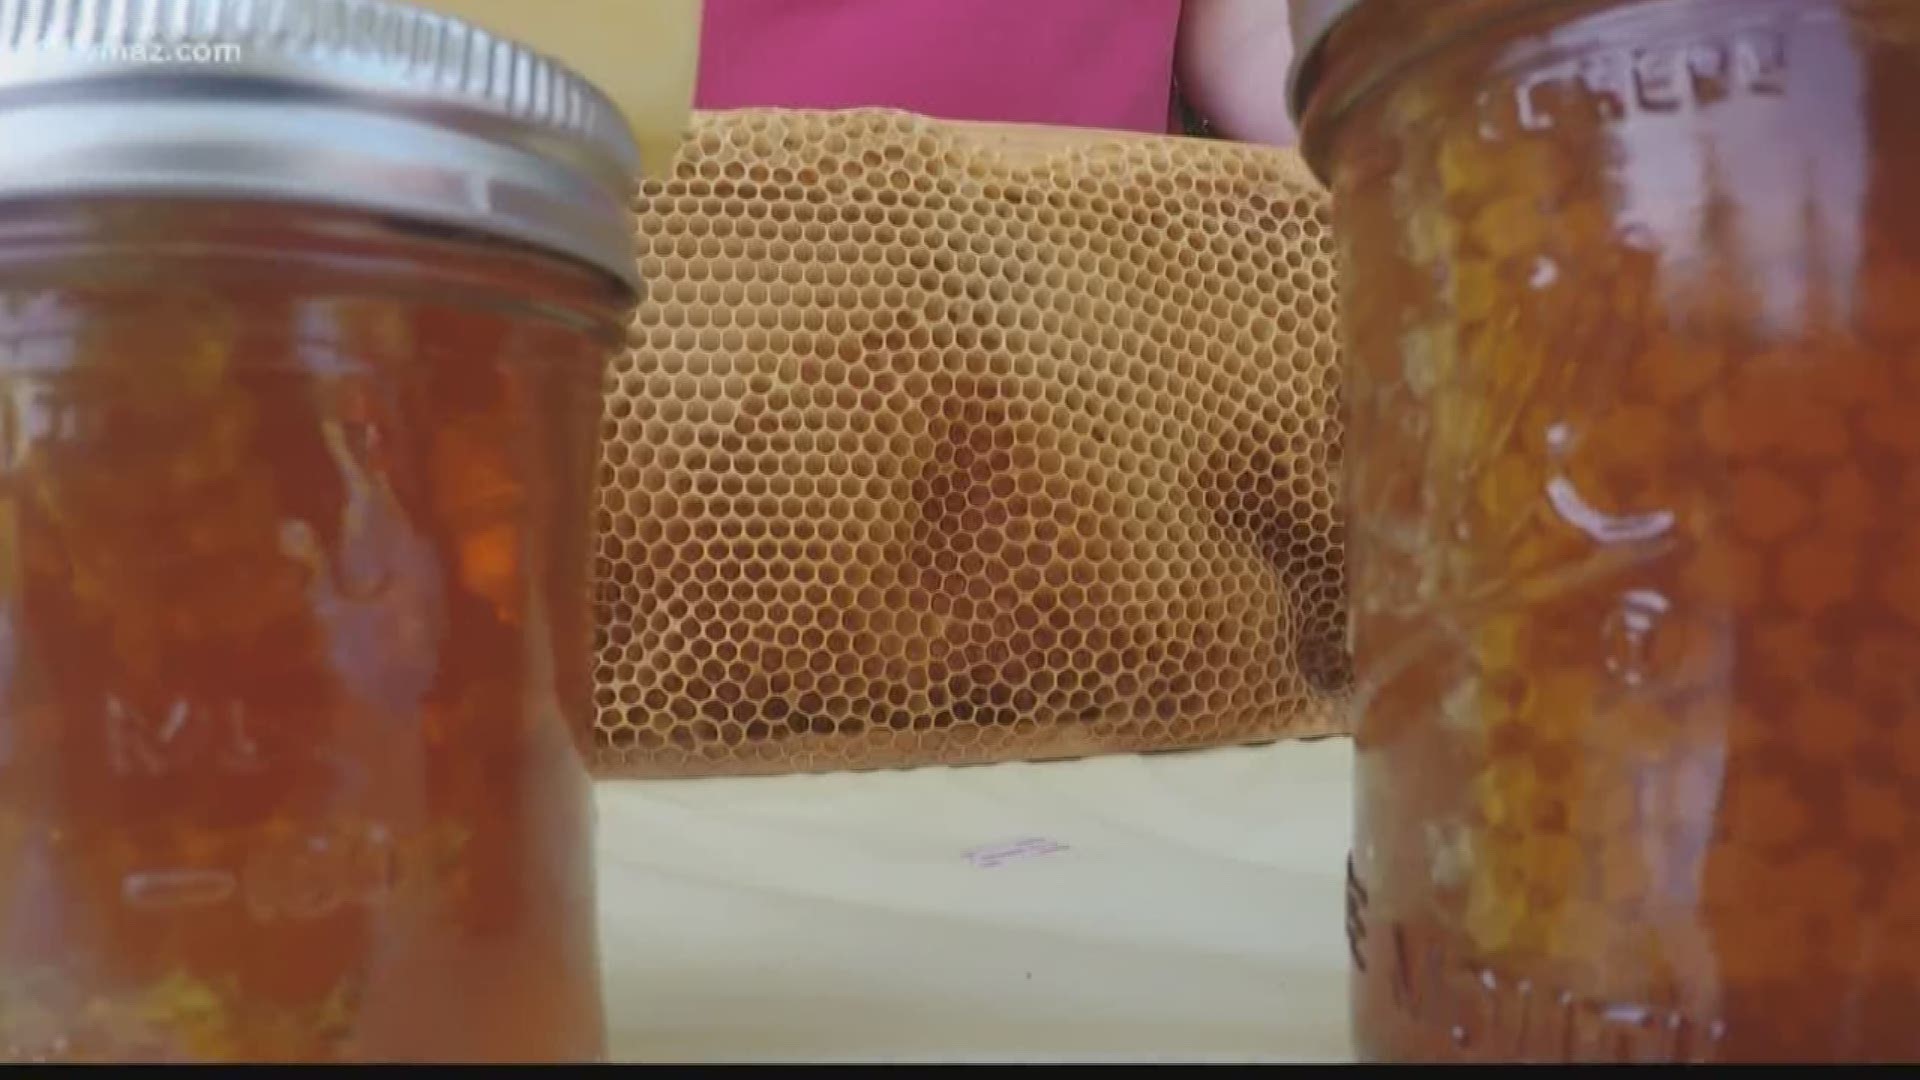 Jones Co. student starts organization to educate people about honeybees